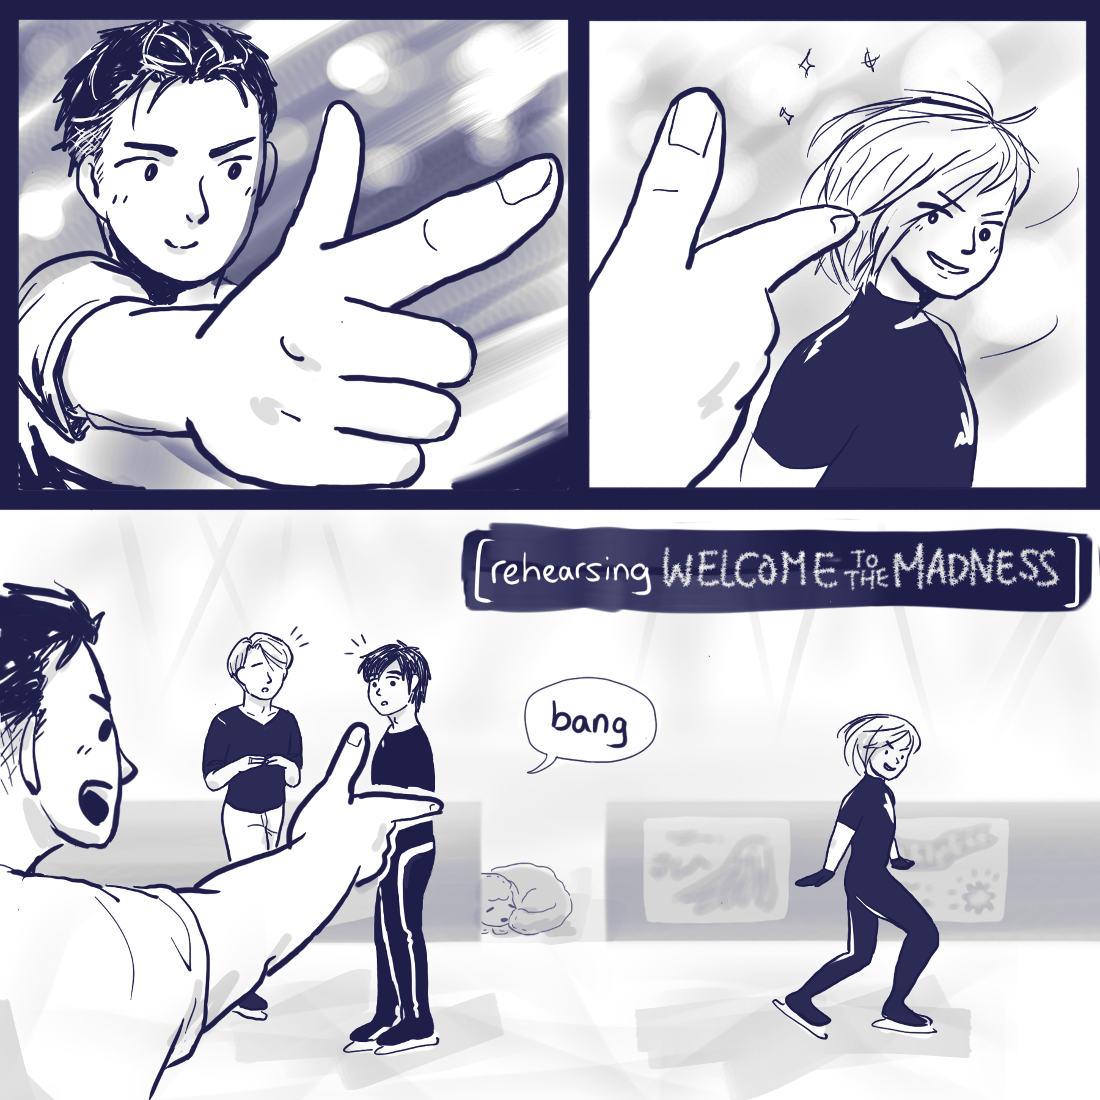 suits-neechan: Yura to Beka: WELCOME TO THE MADNESS that is my unbelievably extra